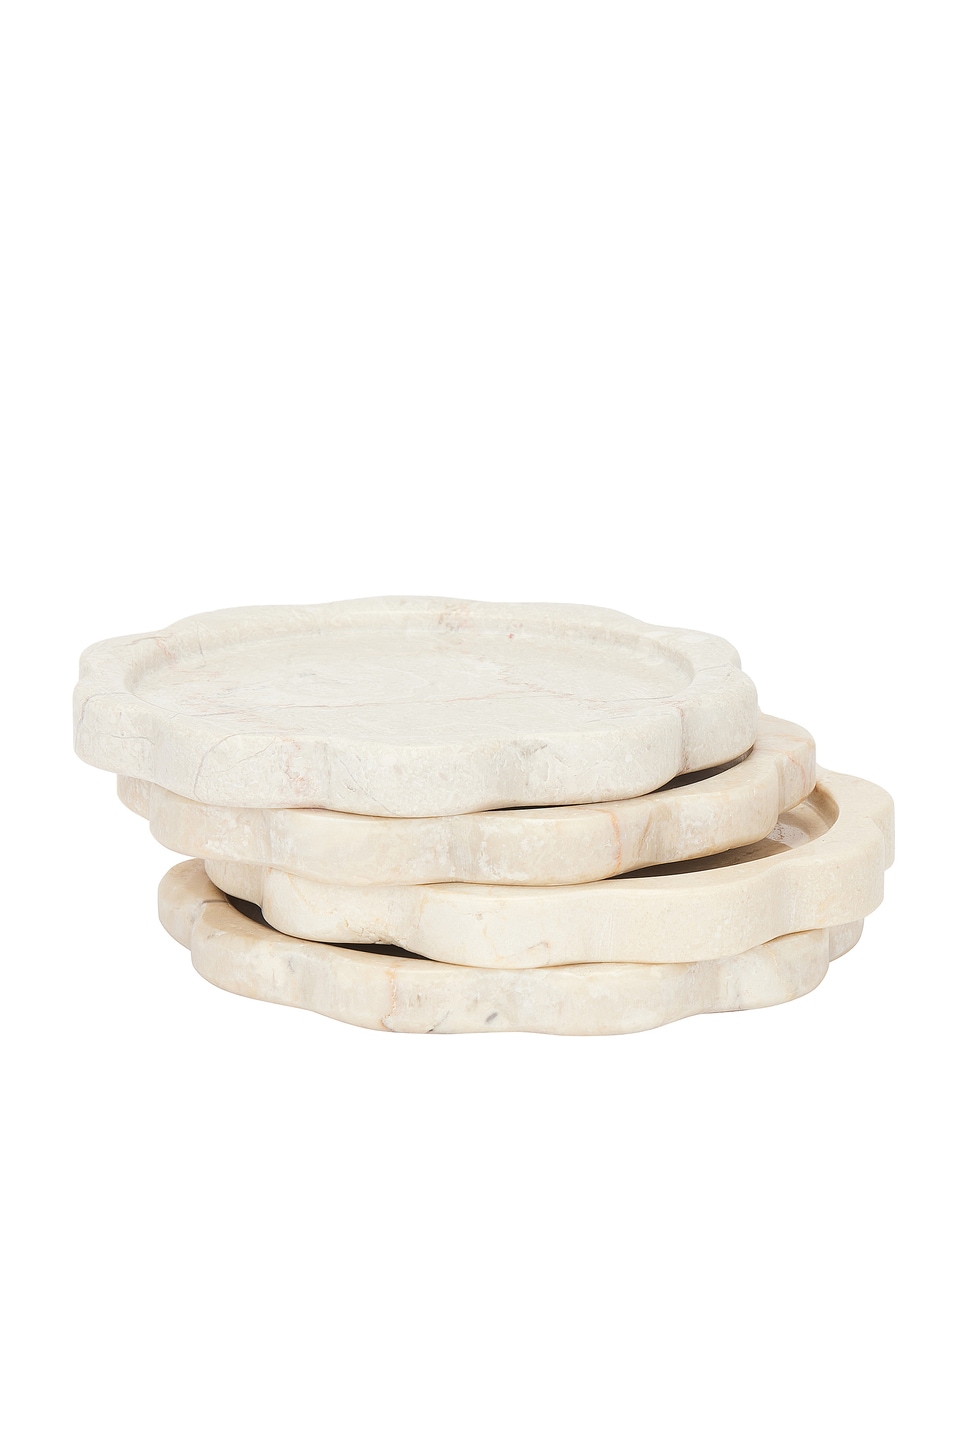 Image 1 of Anastasio Home Sun Coasters Set Of 4 in Oyster